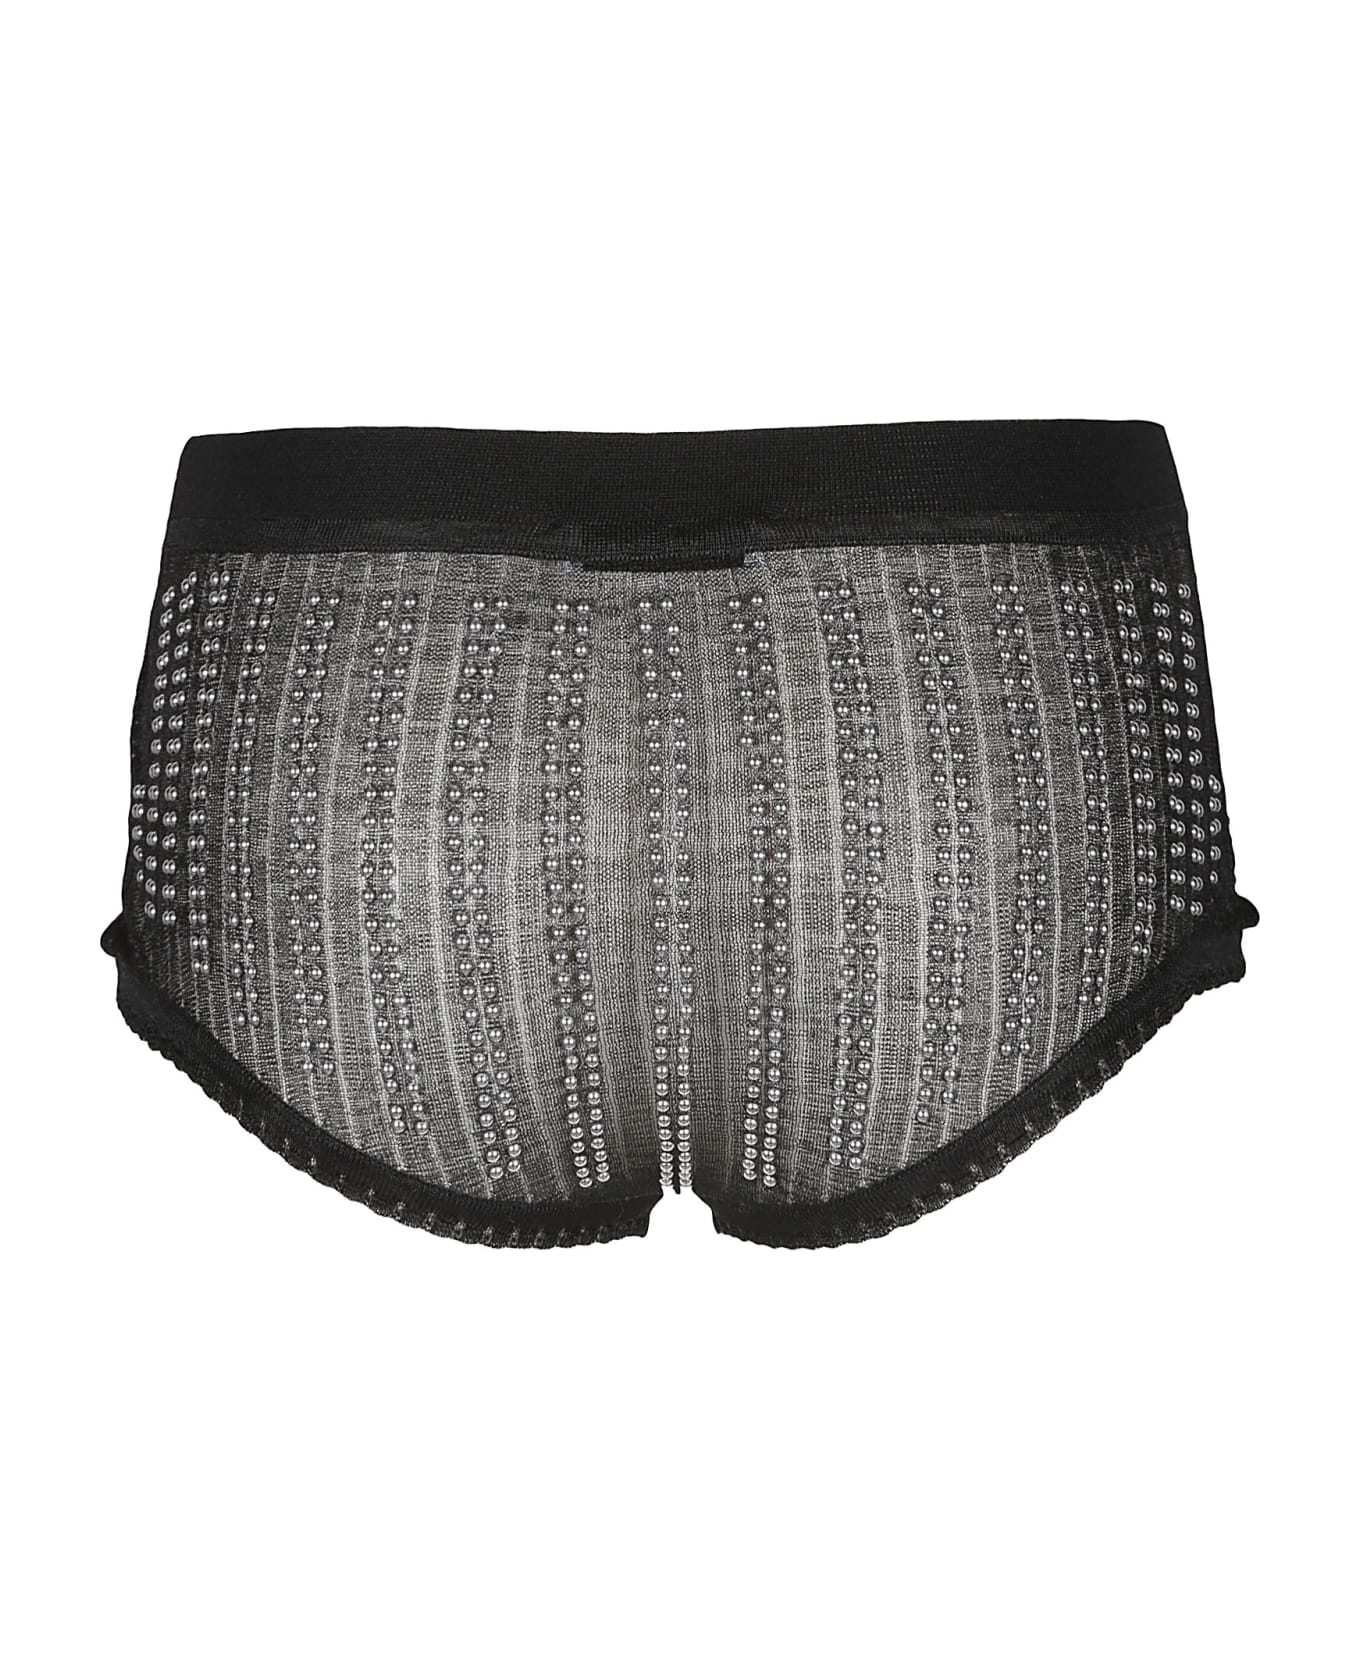 Paco Rabanne Black Knitted High Waisted Briefs With Studs - Nero